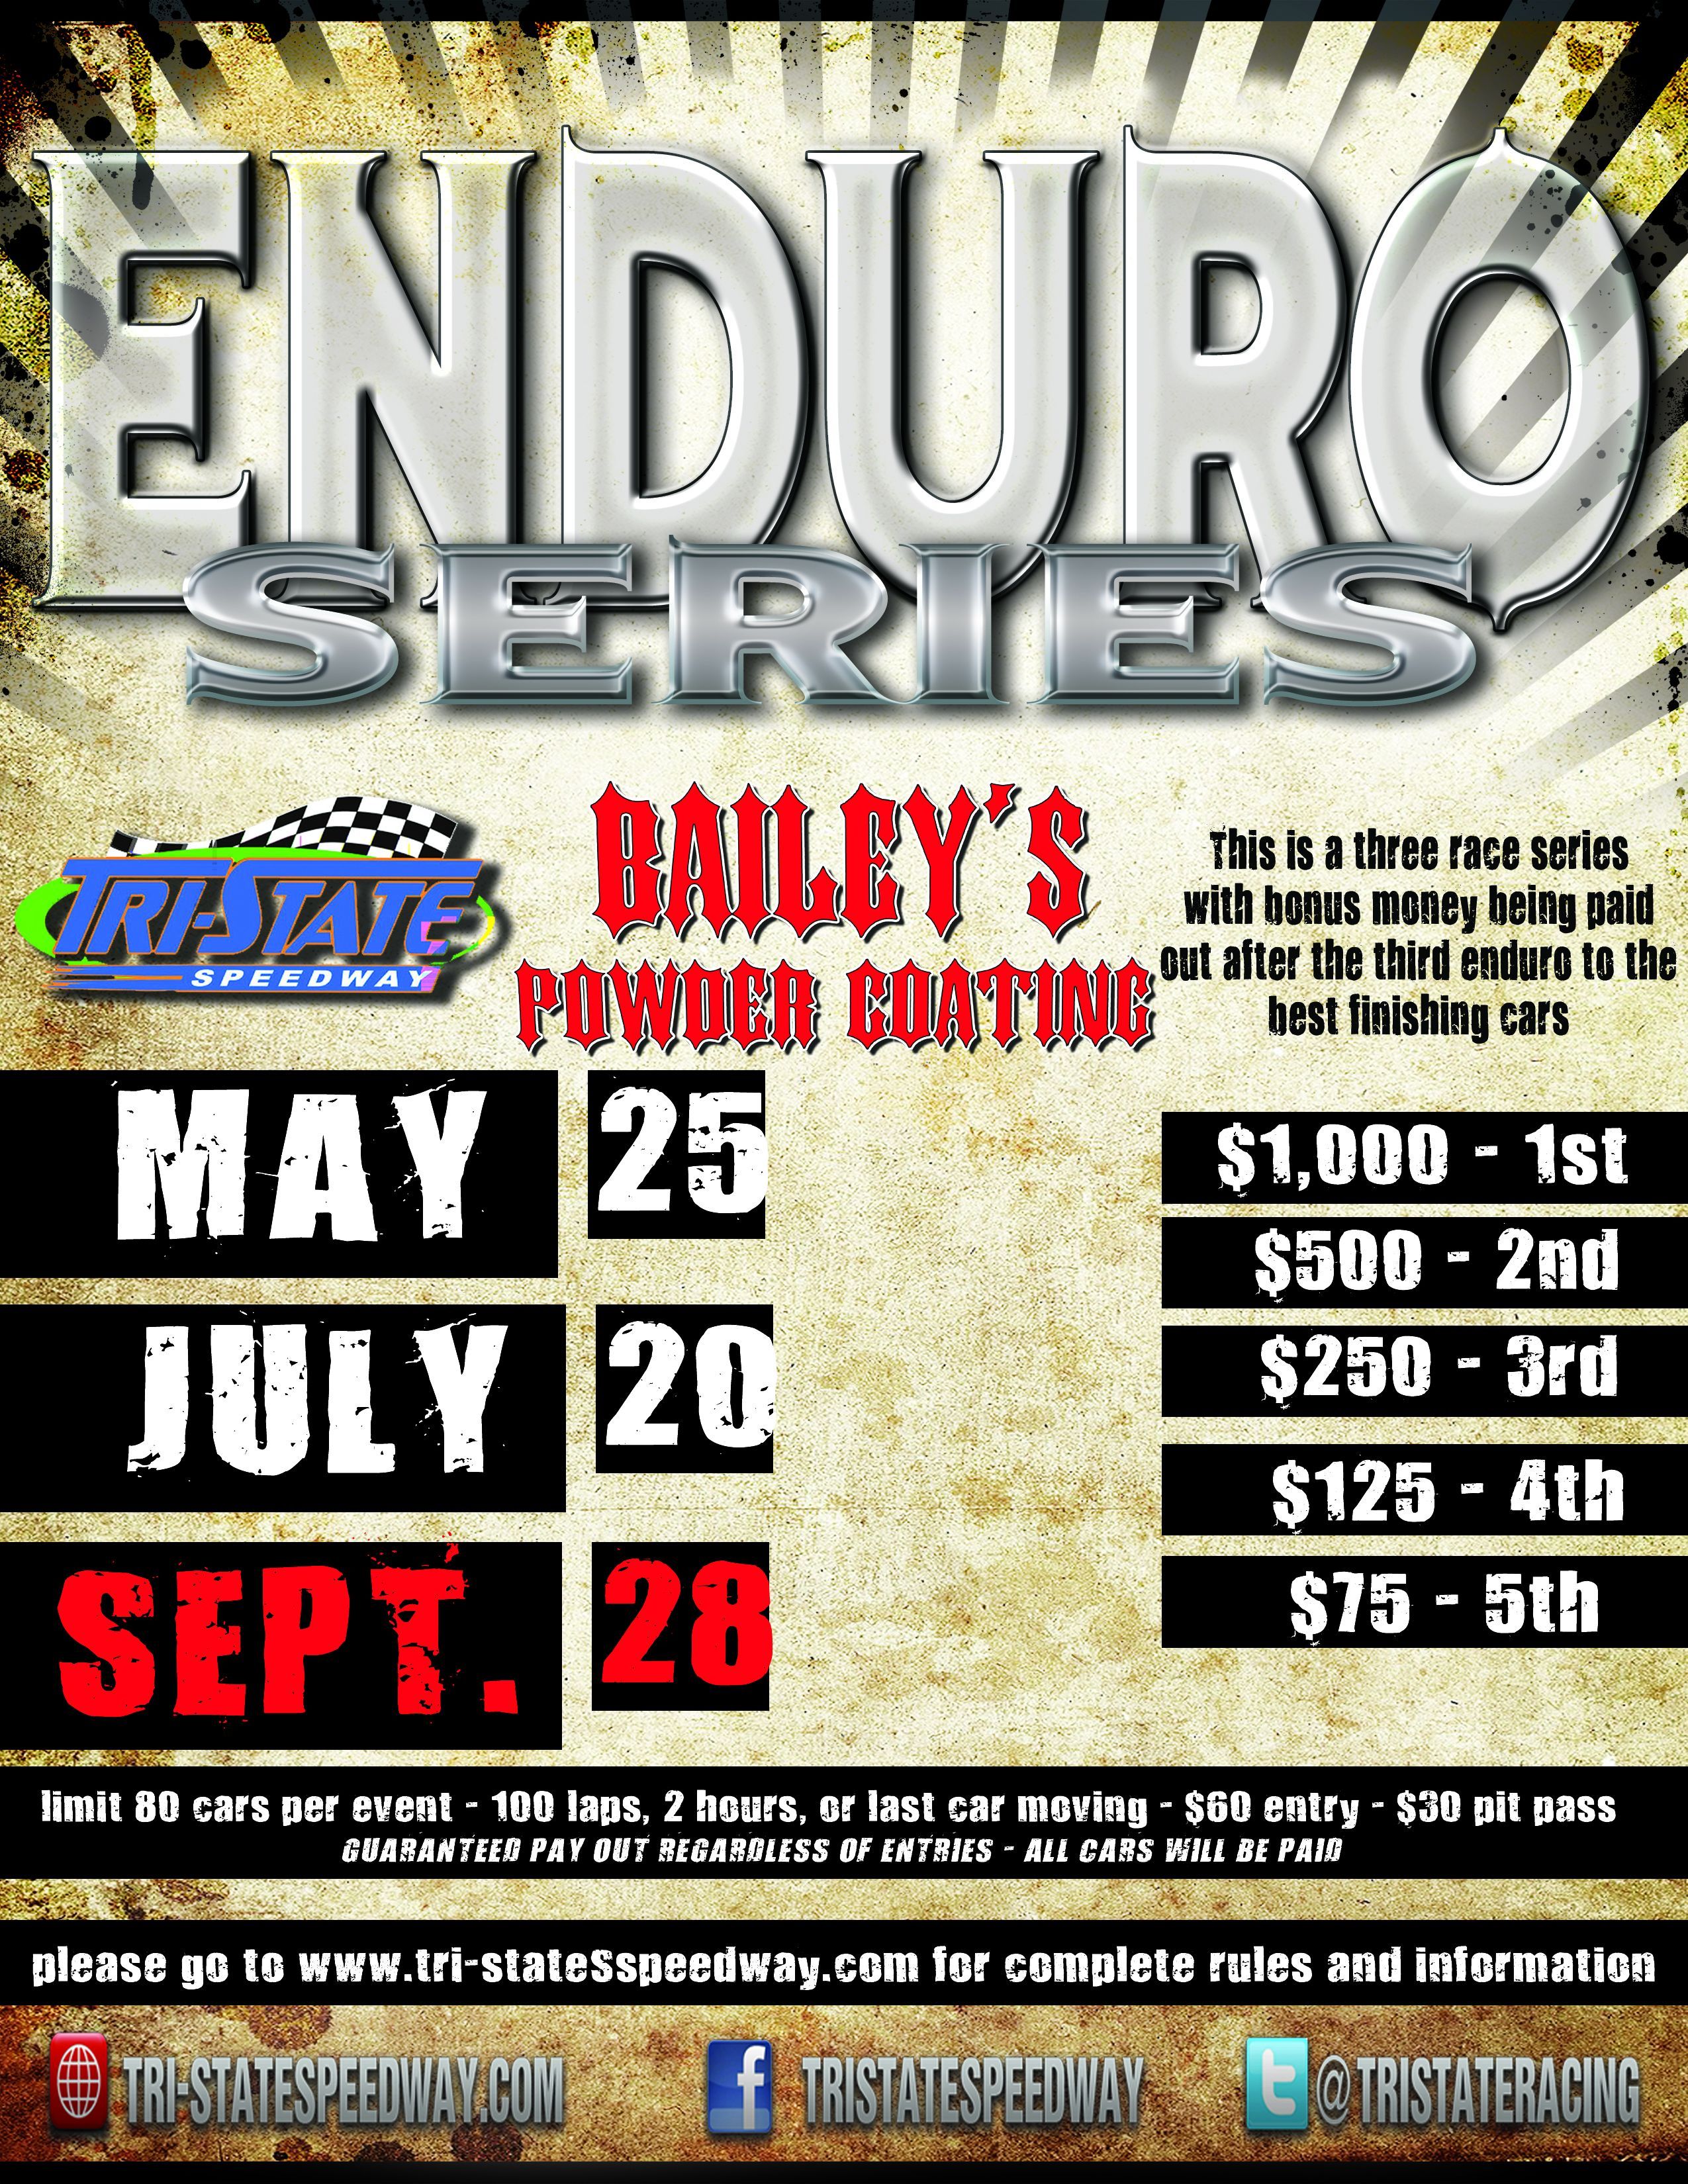 Enduro Series Race #3 and 43rd Annual Points Championship